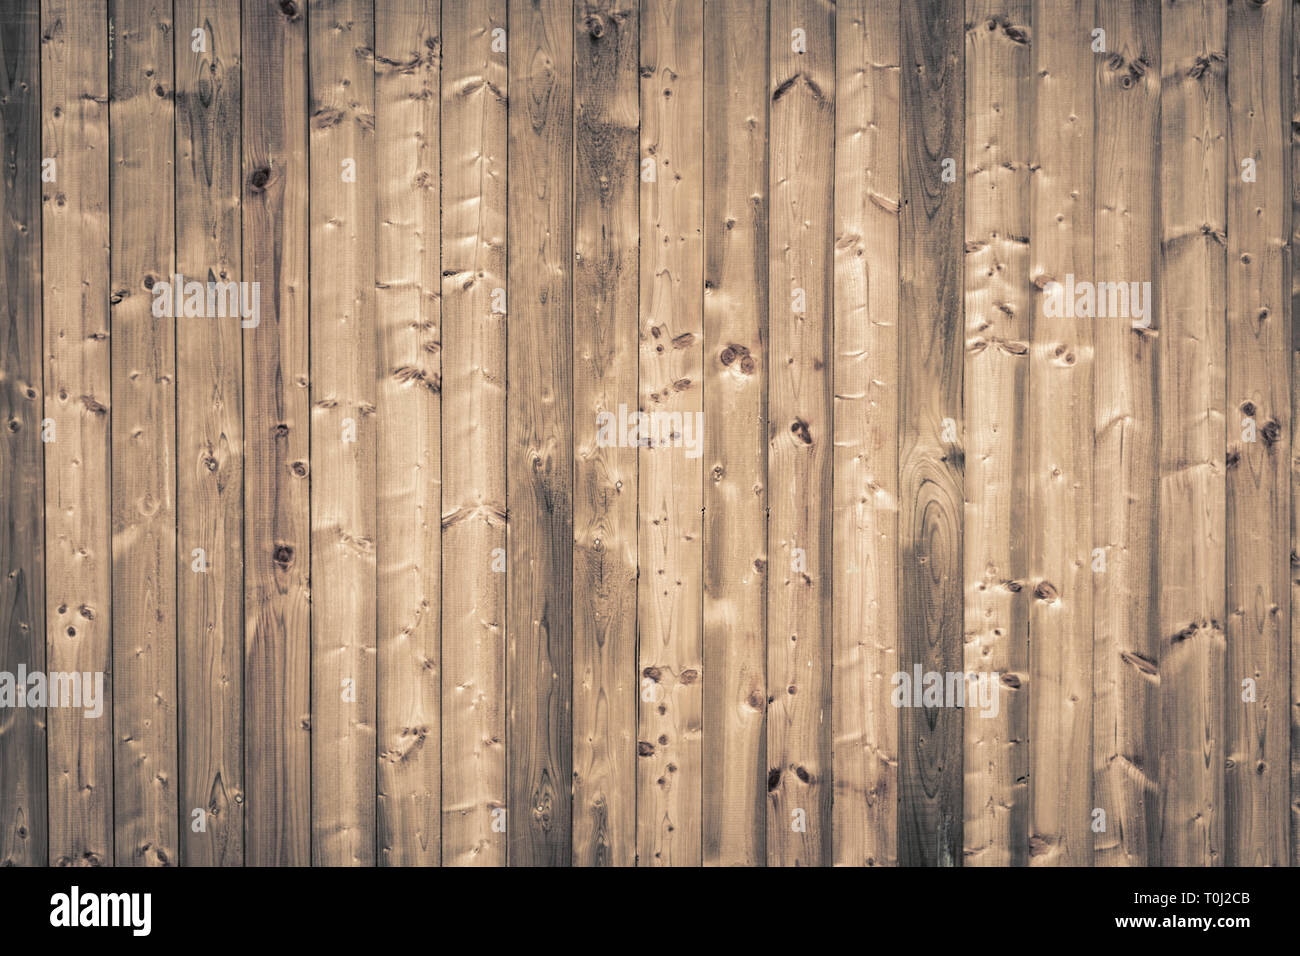 wooden board background - wood plank wall, wood texture Stock Photo